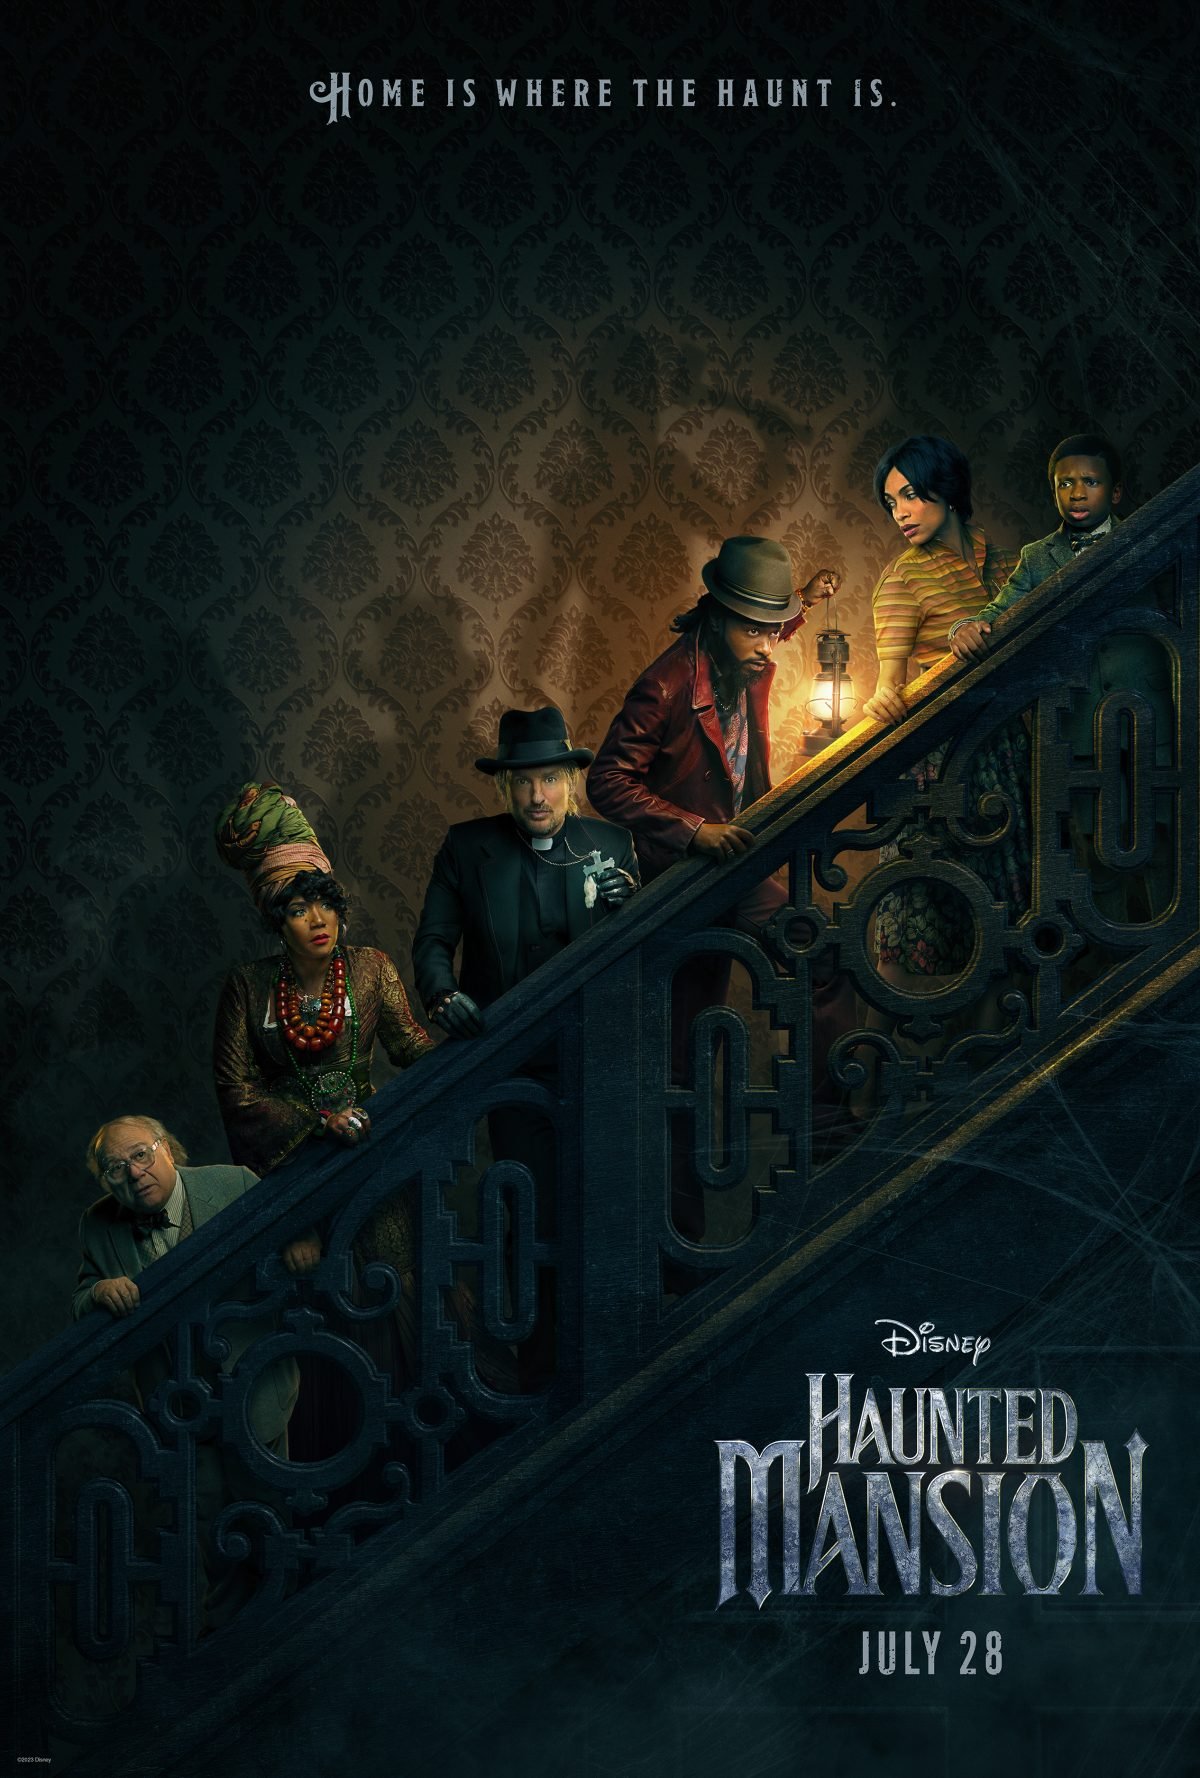 The cast of the Haunted Mansion movie lines up on the steps in a dark and creepy poster